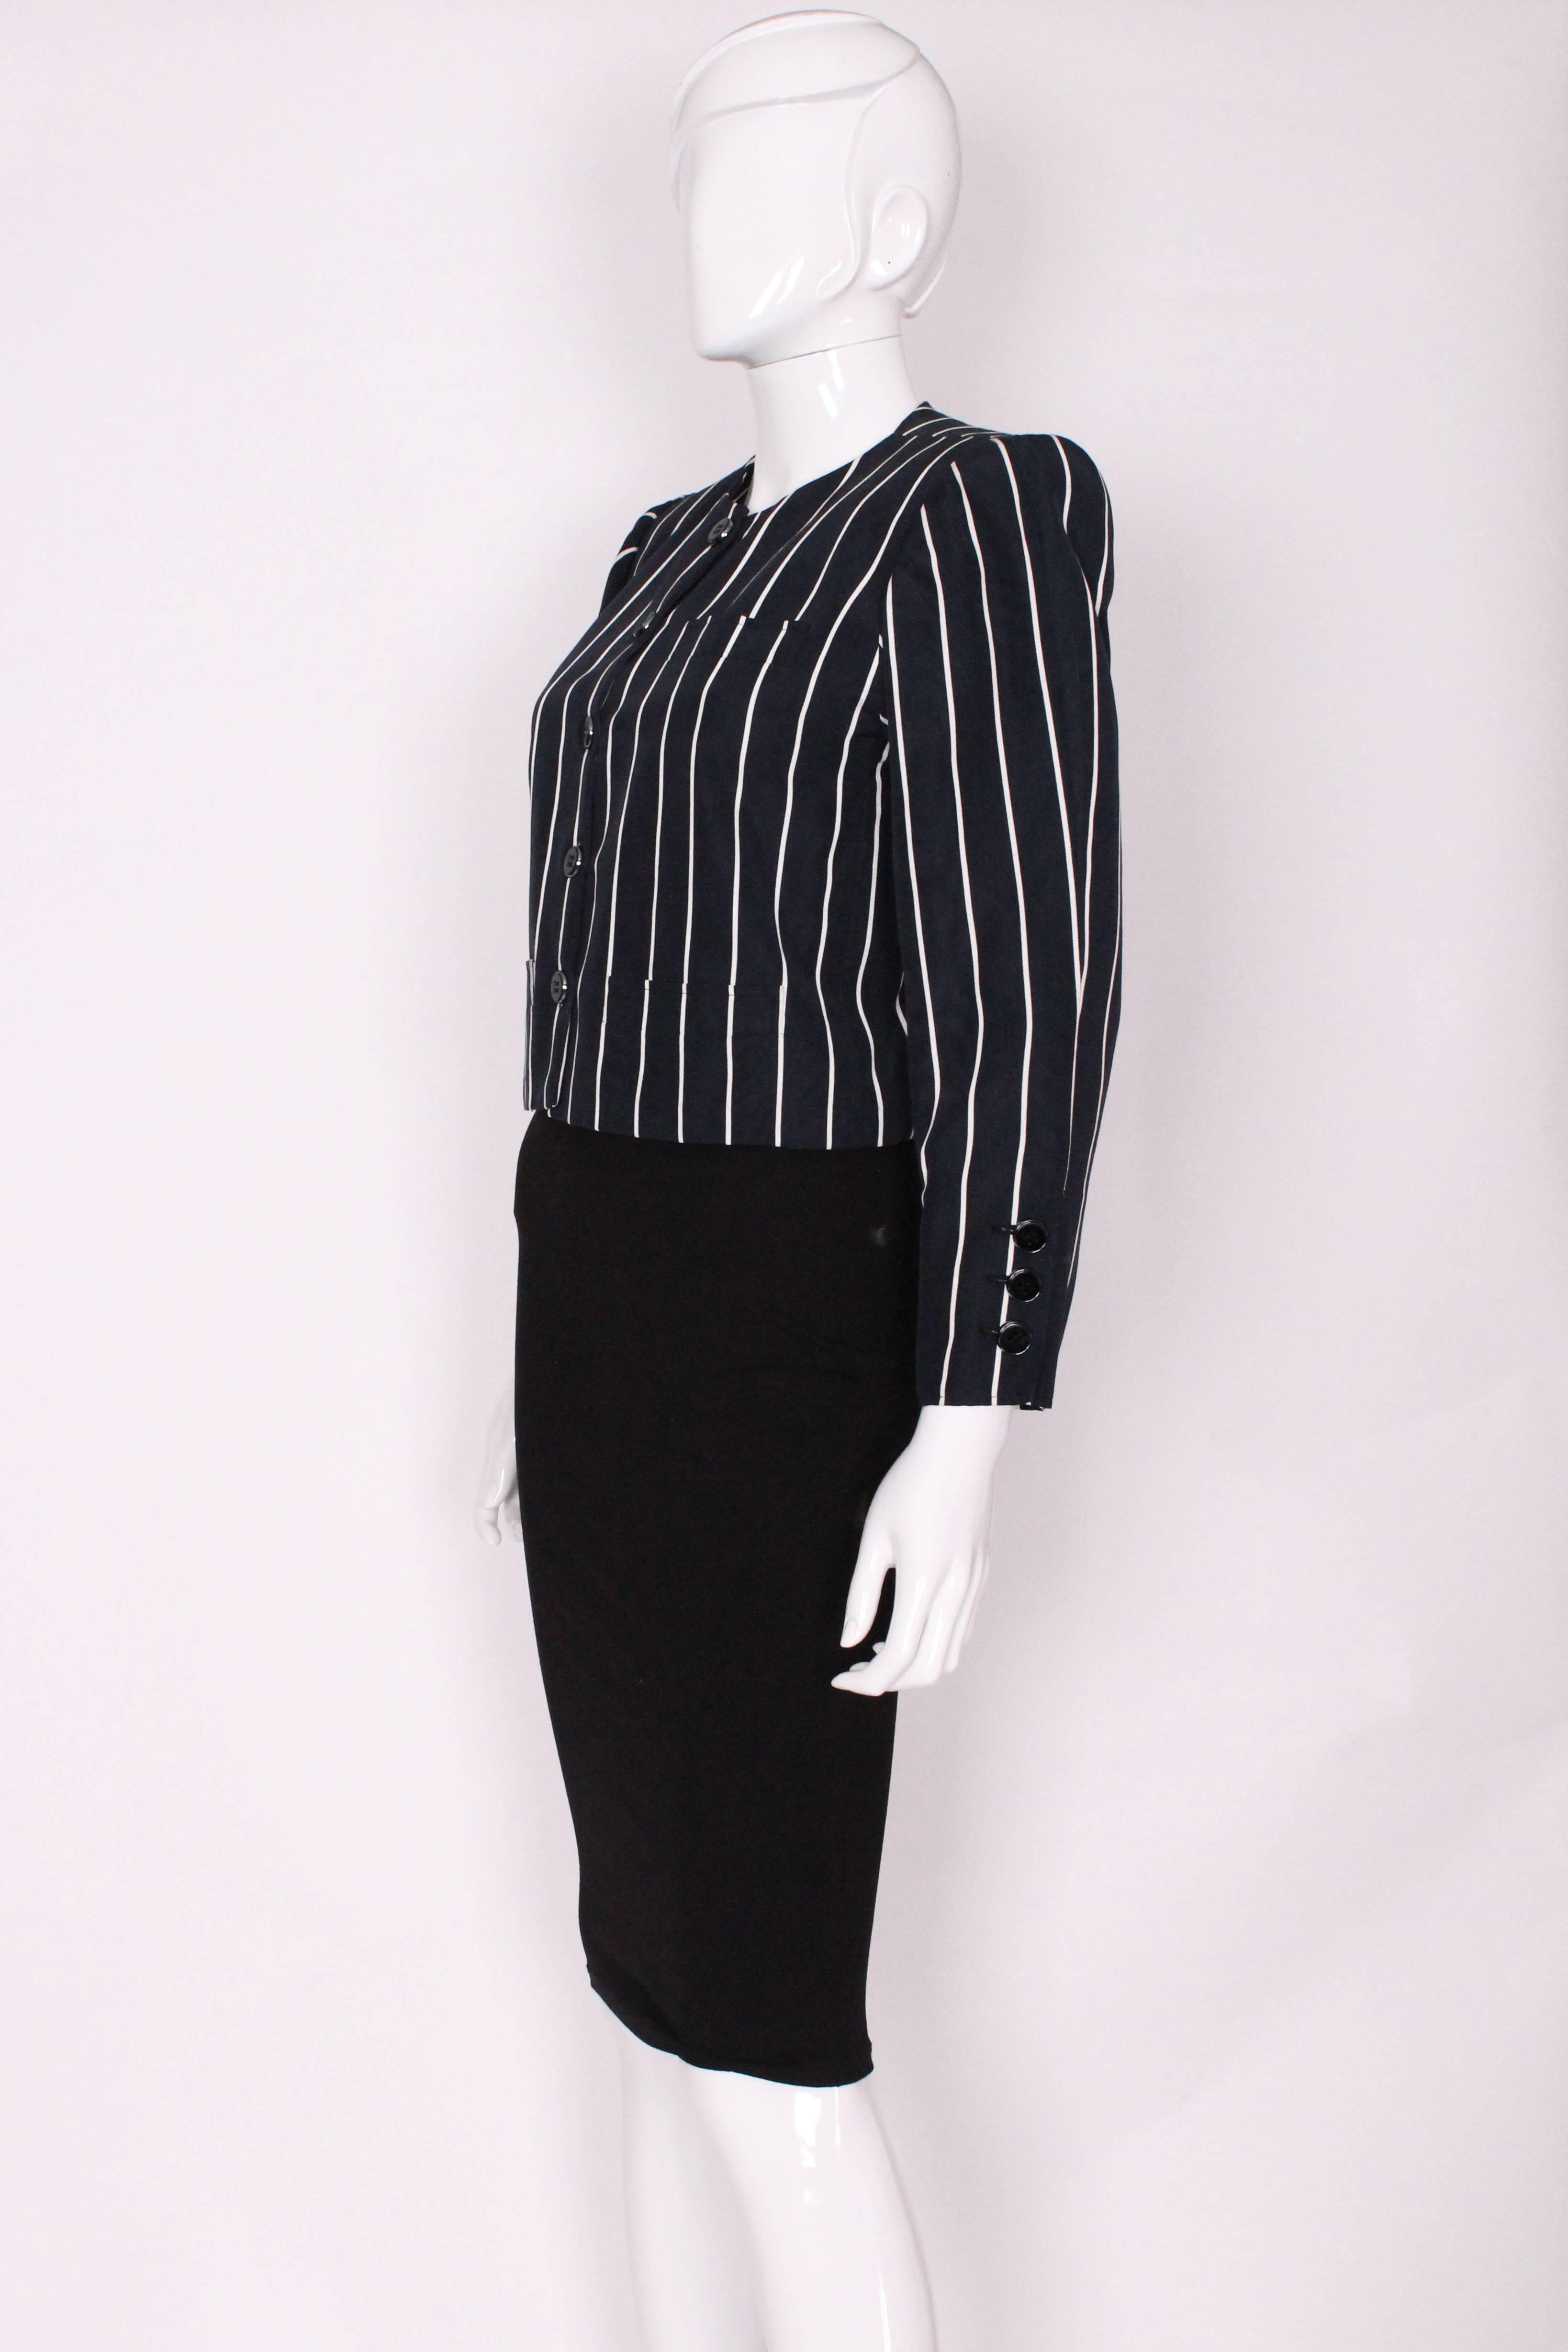 Black A vintage 1980s Yves Saint Laurent  Navy and White Striped Crop Jacket